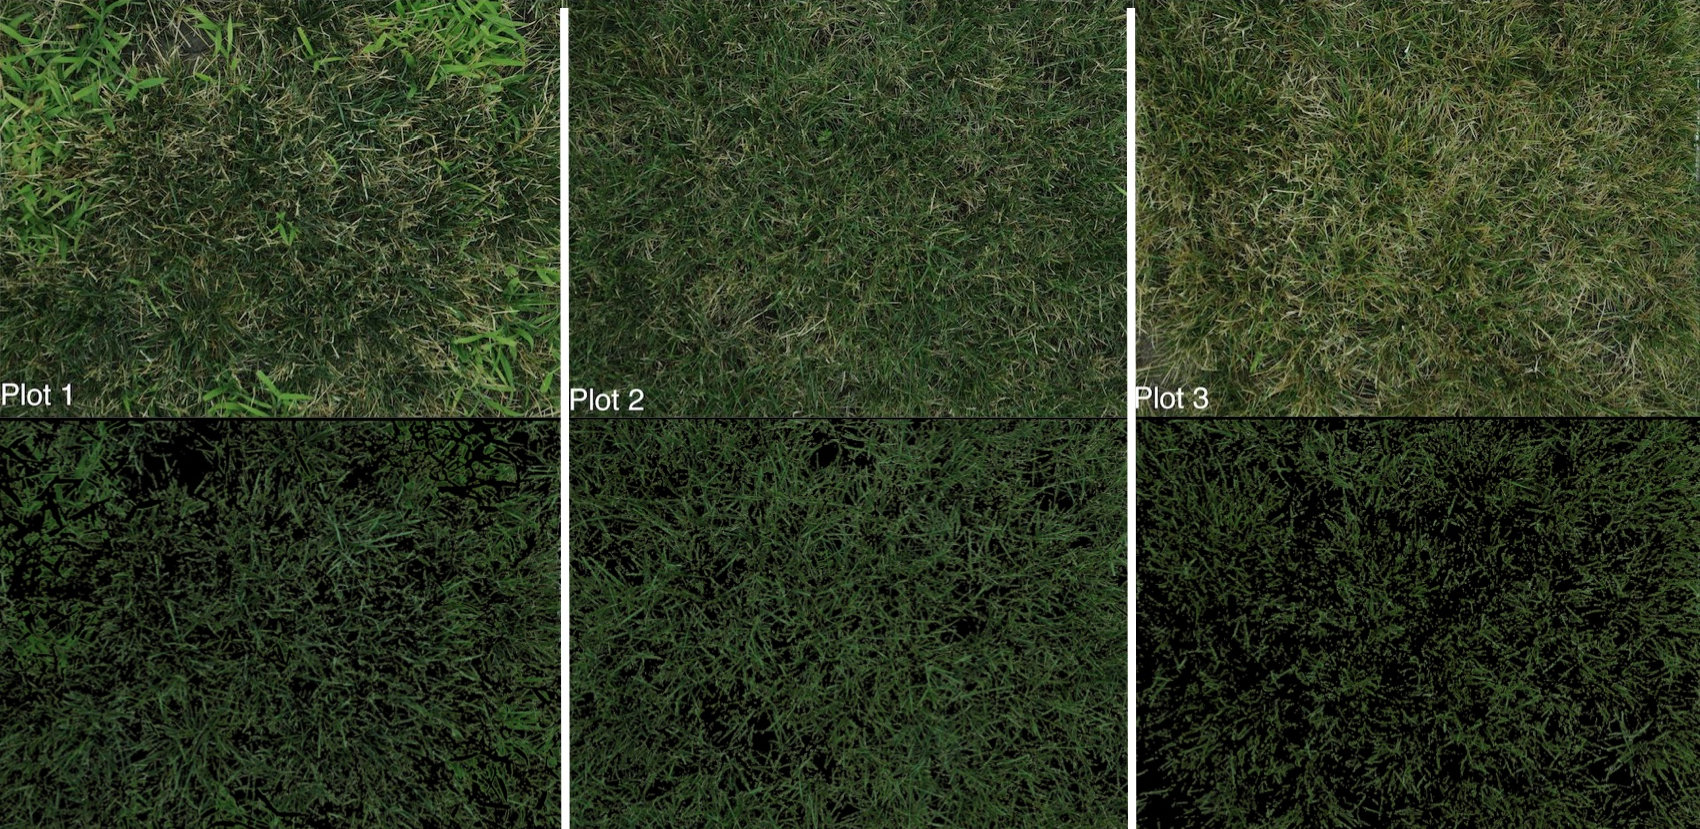 Original images of the three perennial ryegrass plots compared with the images with only healthy green turfgrass